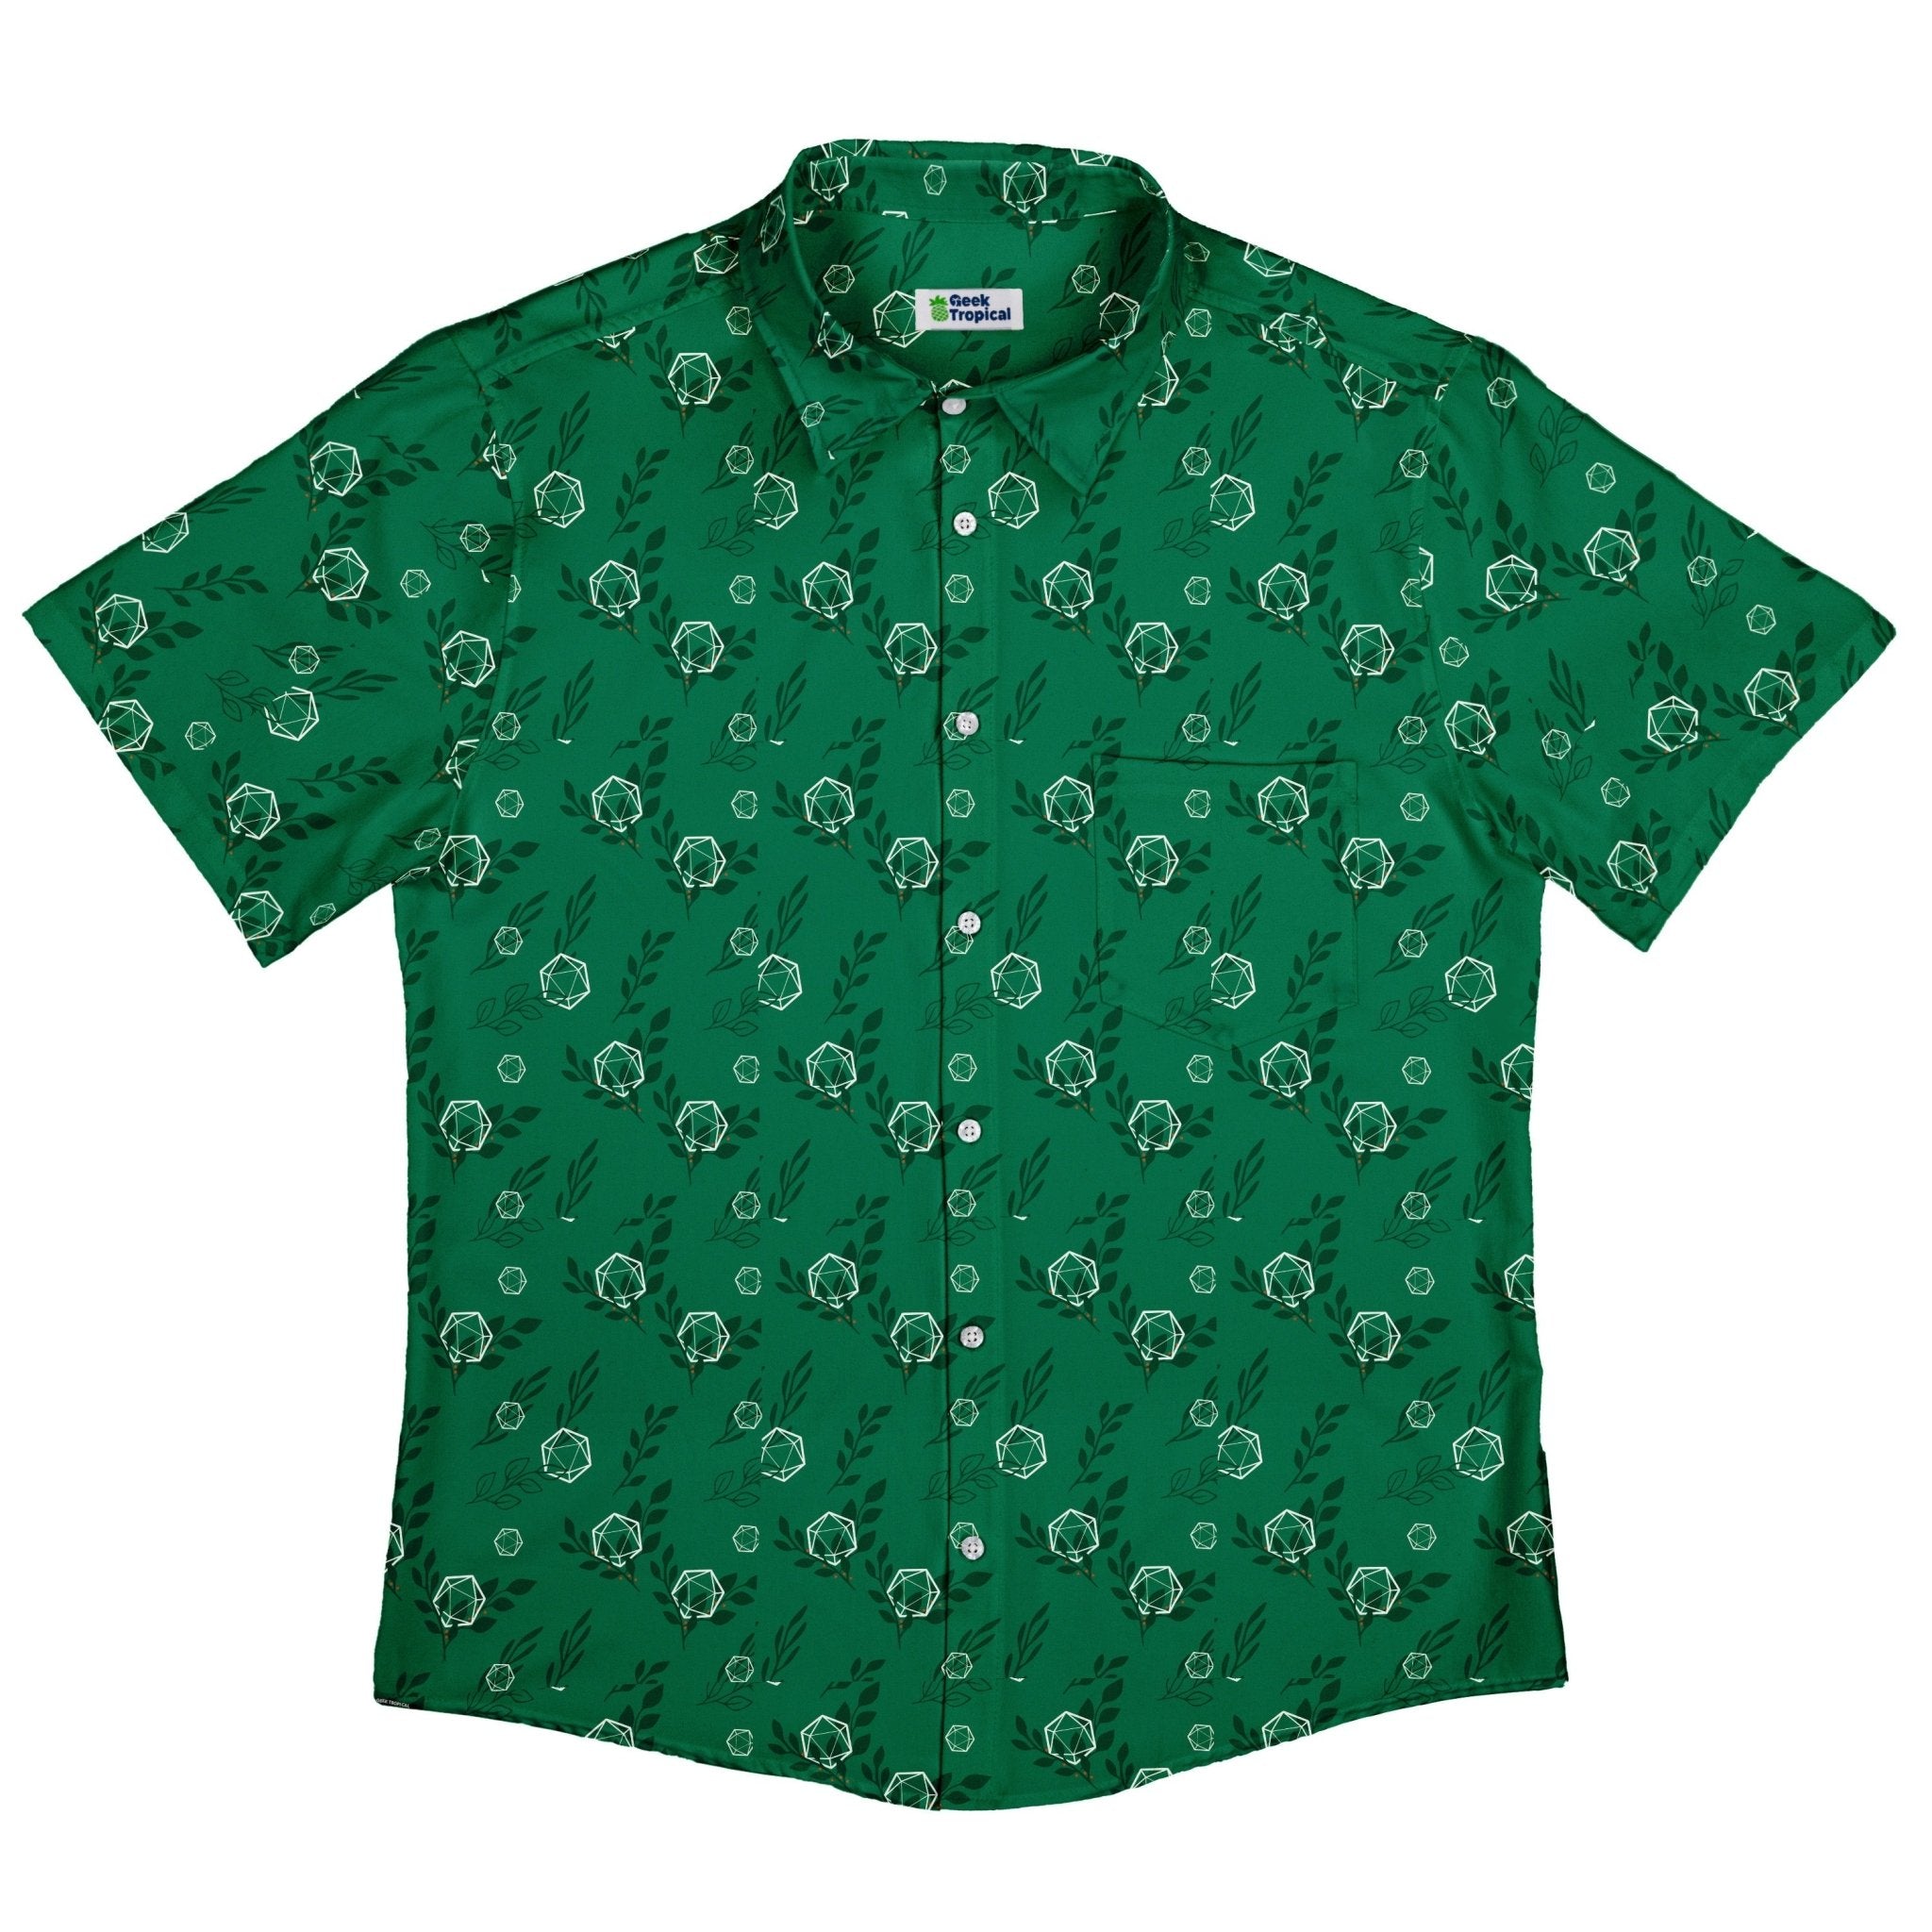 Leafy Green Dice Button Up Shirt - adult sizing - Botany Print - Design by Heather Davenport